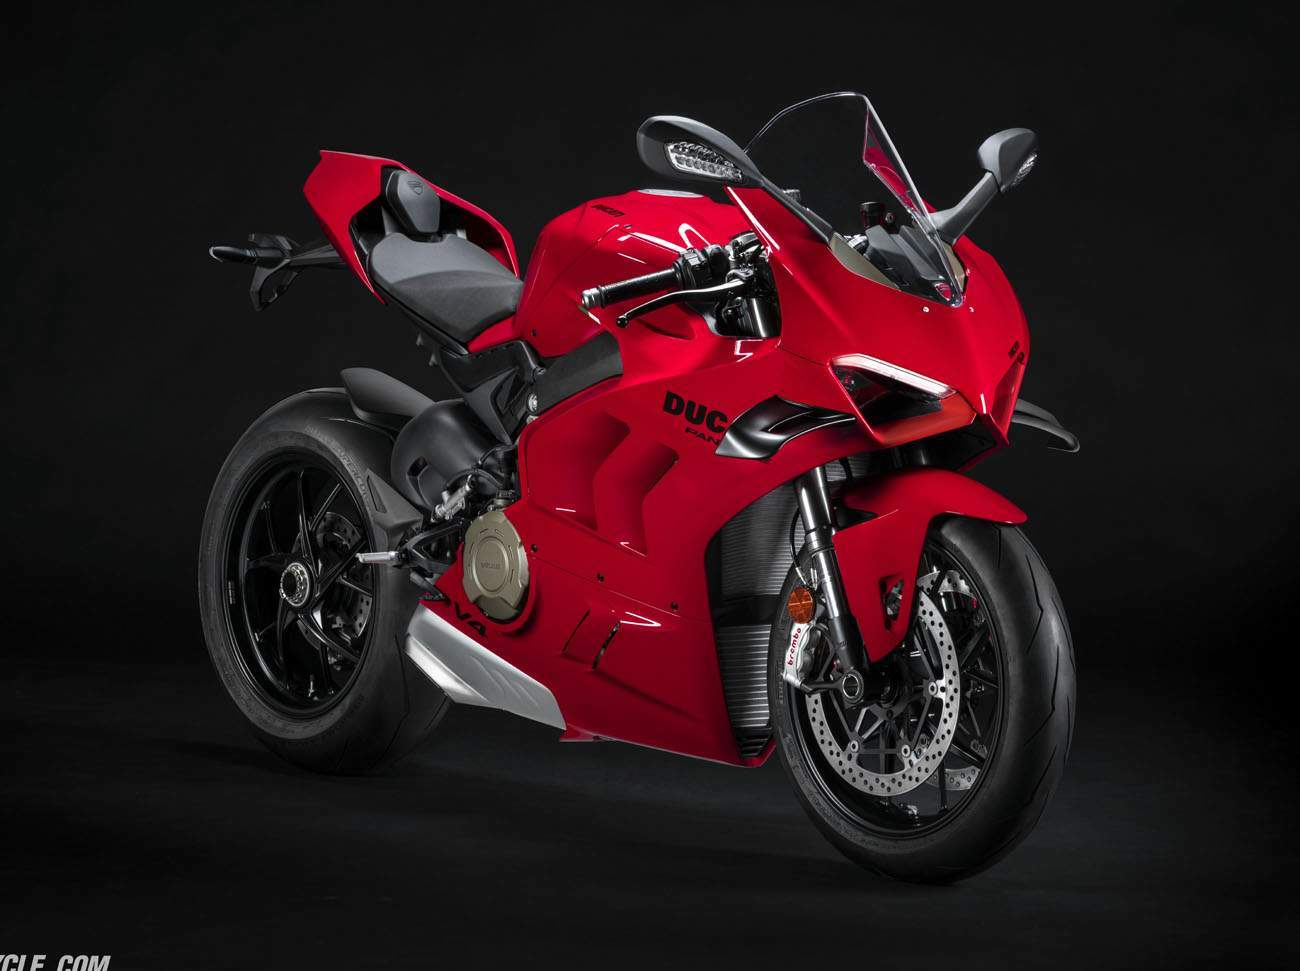 Ducati Panigale V4 technical specifications